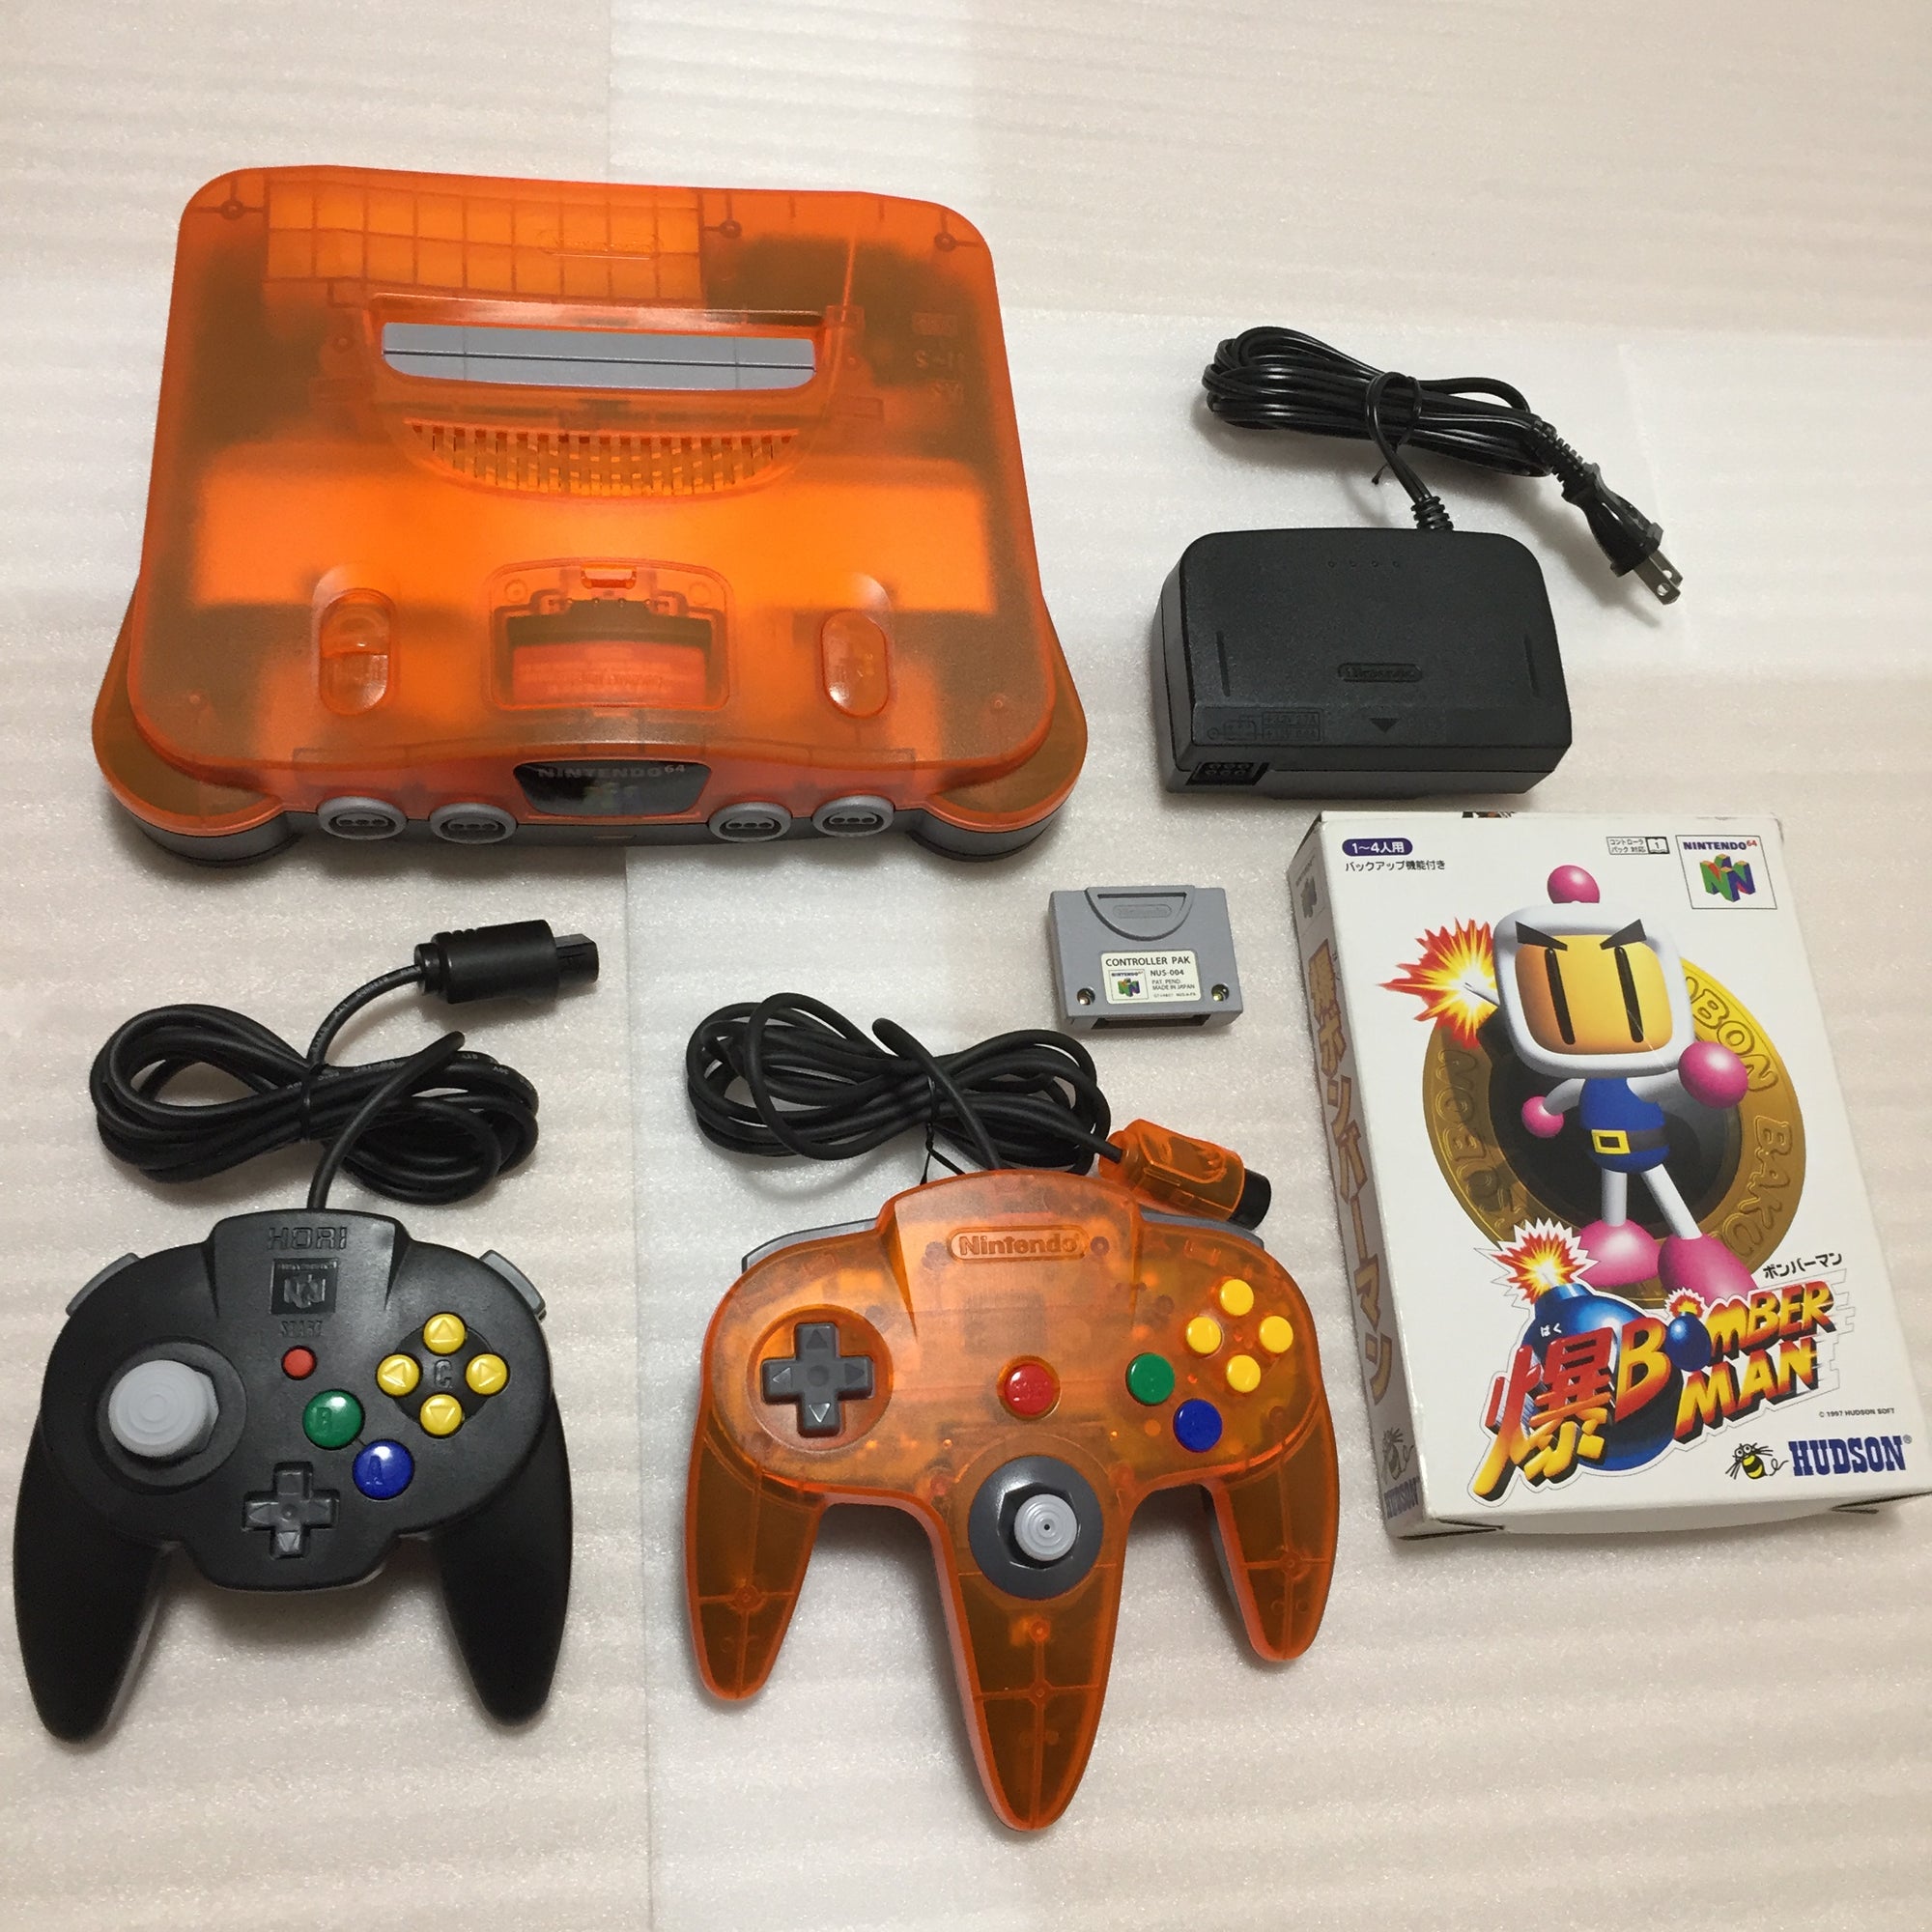 Daiei Hawks Nintendo 64 set with ULTRA HDMI kit and Hori Pad - compatible with JP and US games